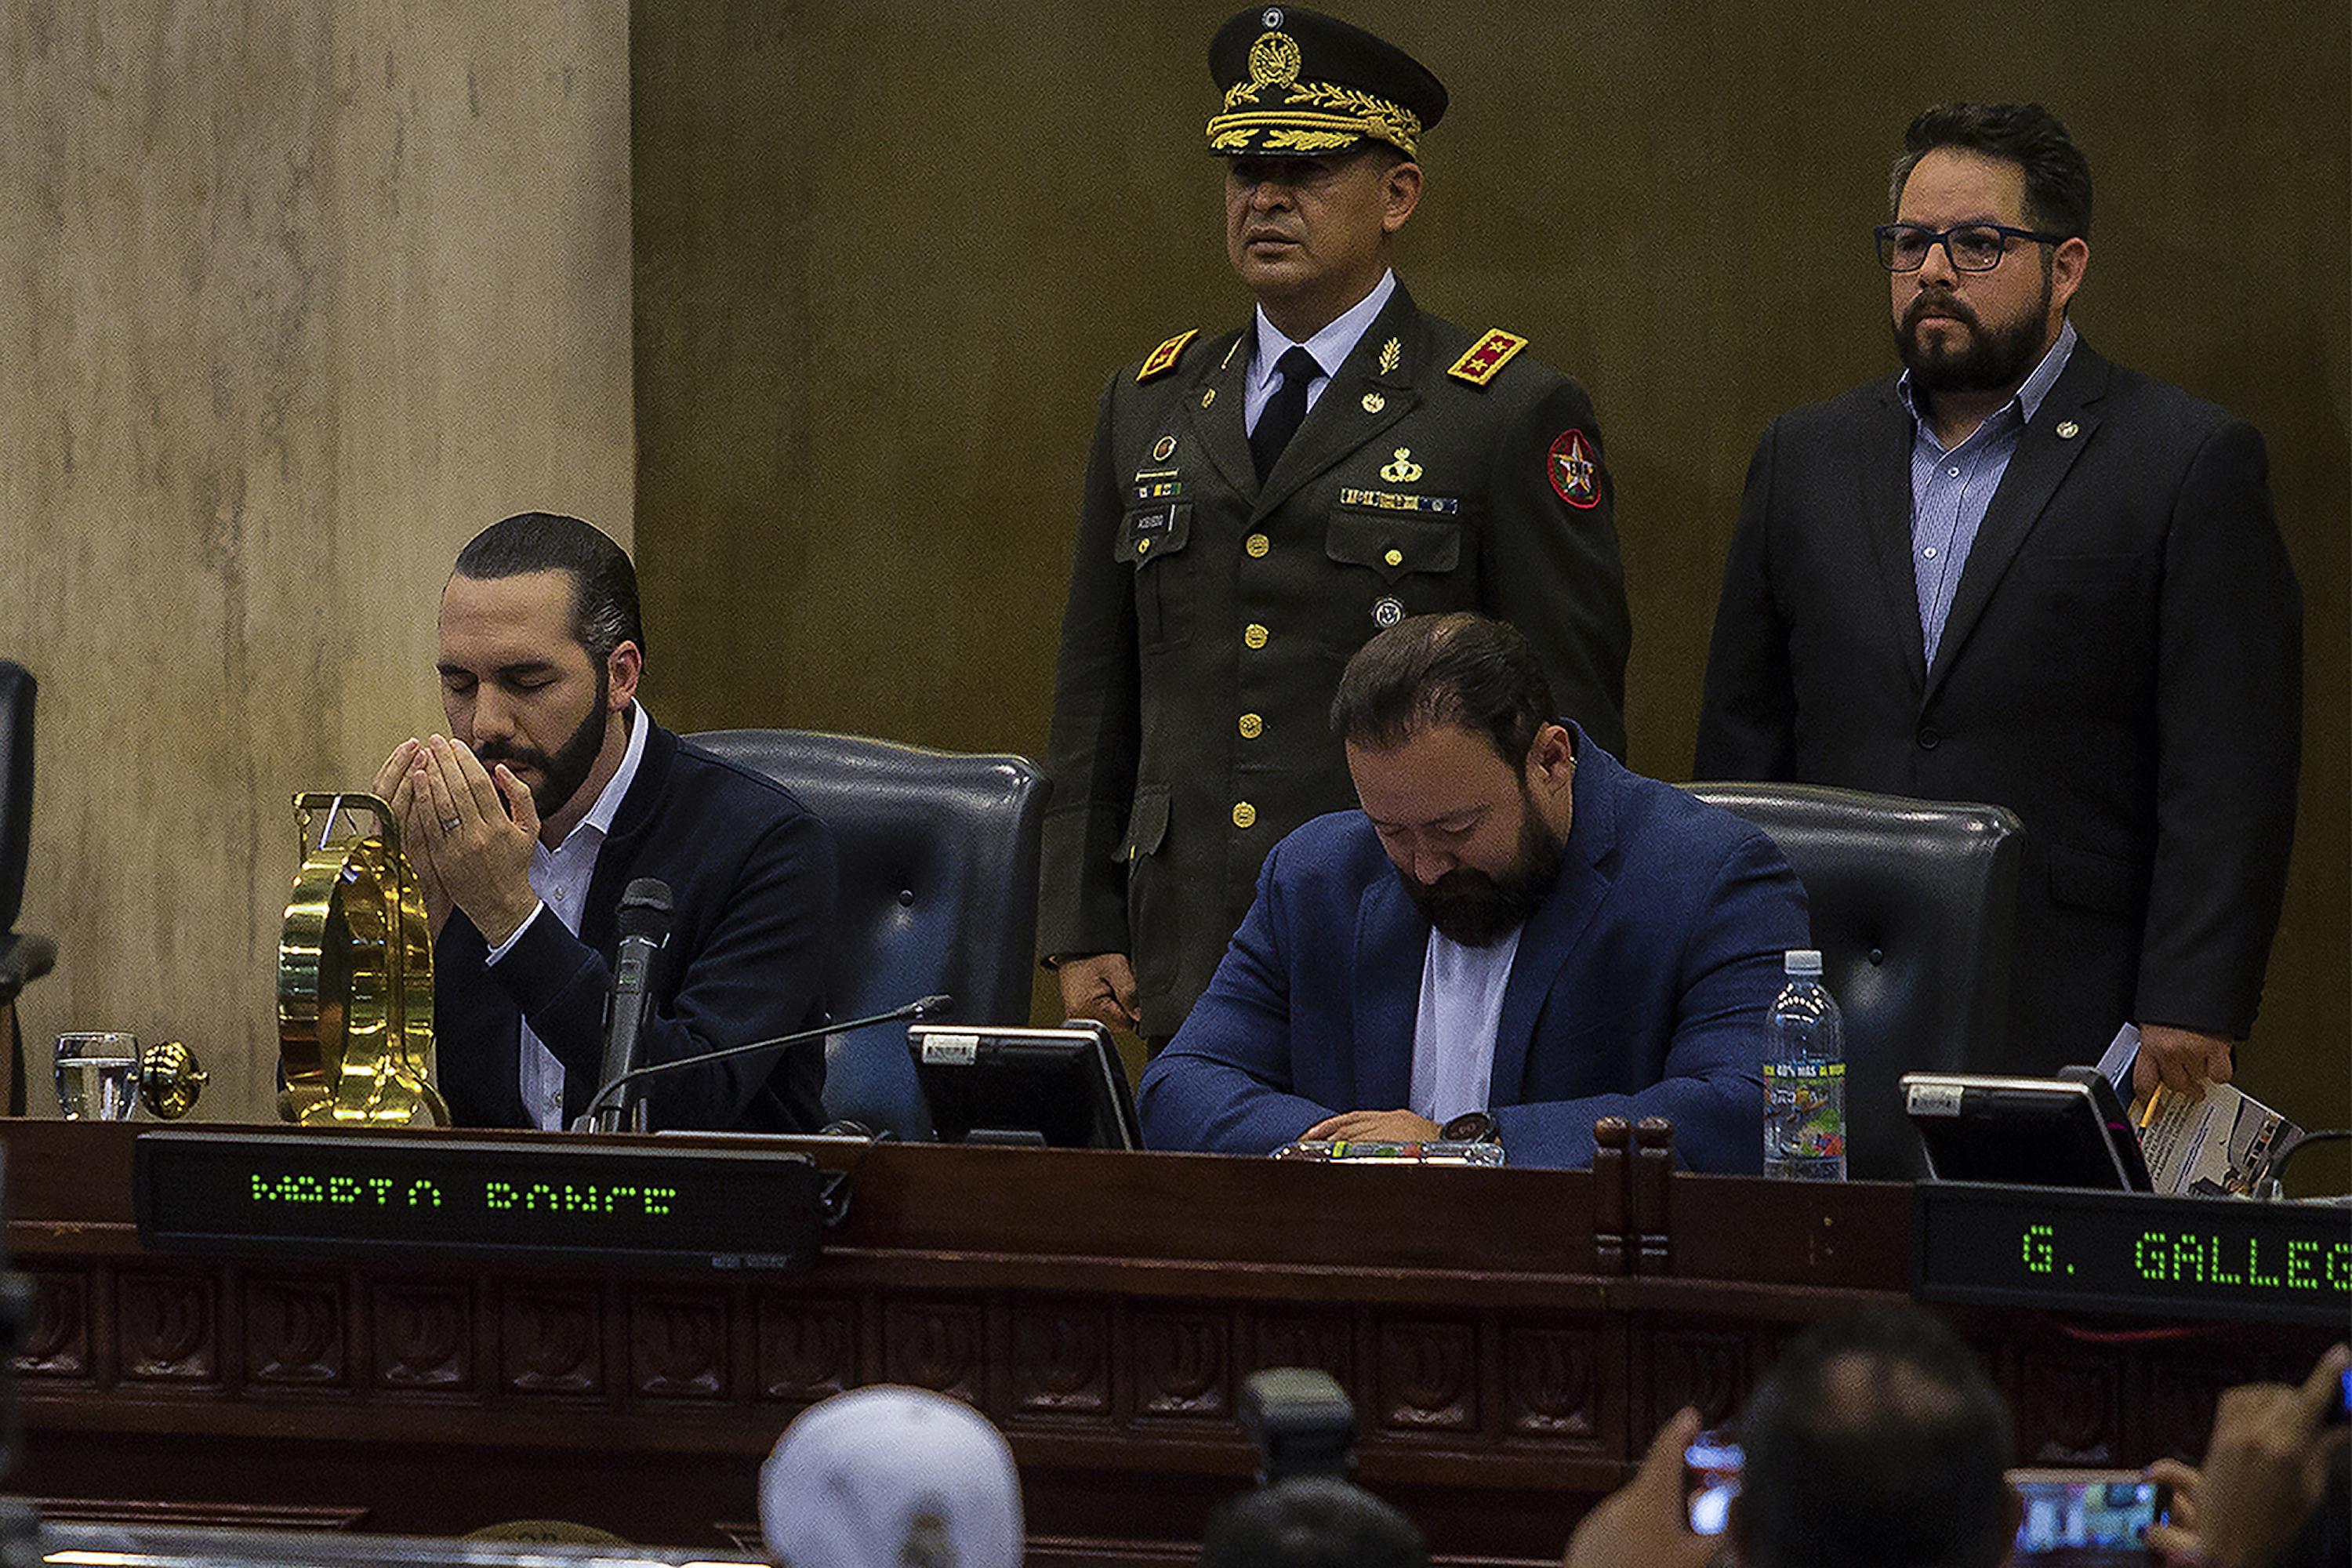 After threatening absent legislators in the legislative chamber occupied by soldiers and the police, Bukele prayed next to GANA party legislator Guillermo Gallegos. The president then exited to address a crowd. He claimed that God spoke to him and told him to be patient. Photo: Víctor Peña/El Faro